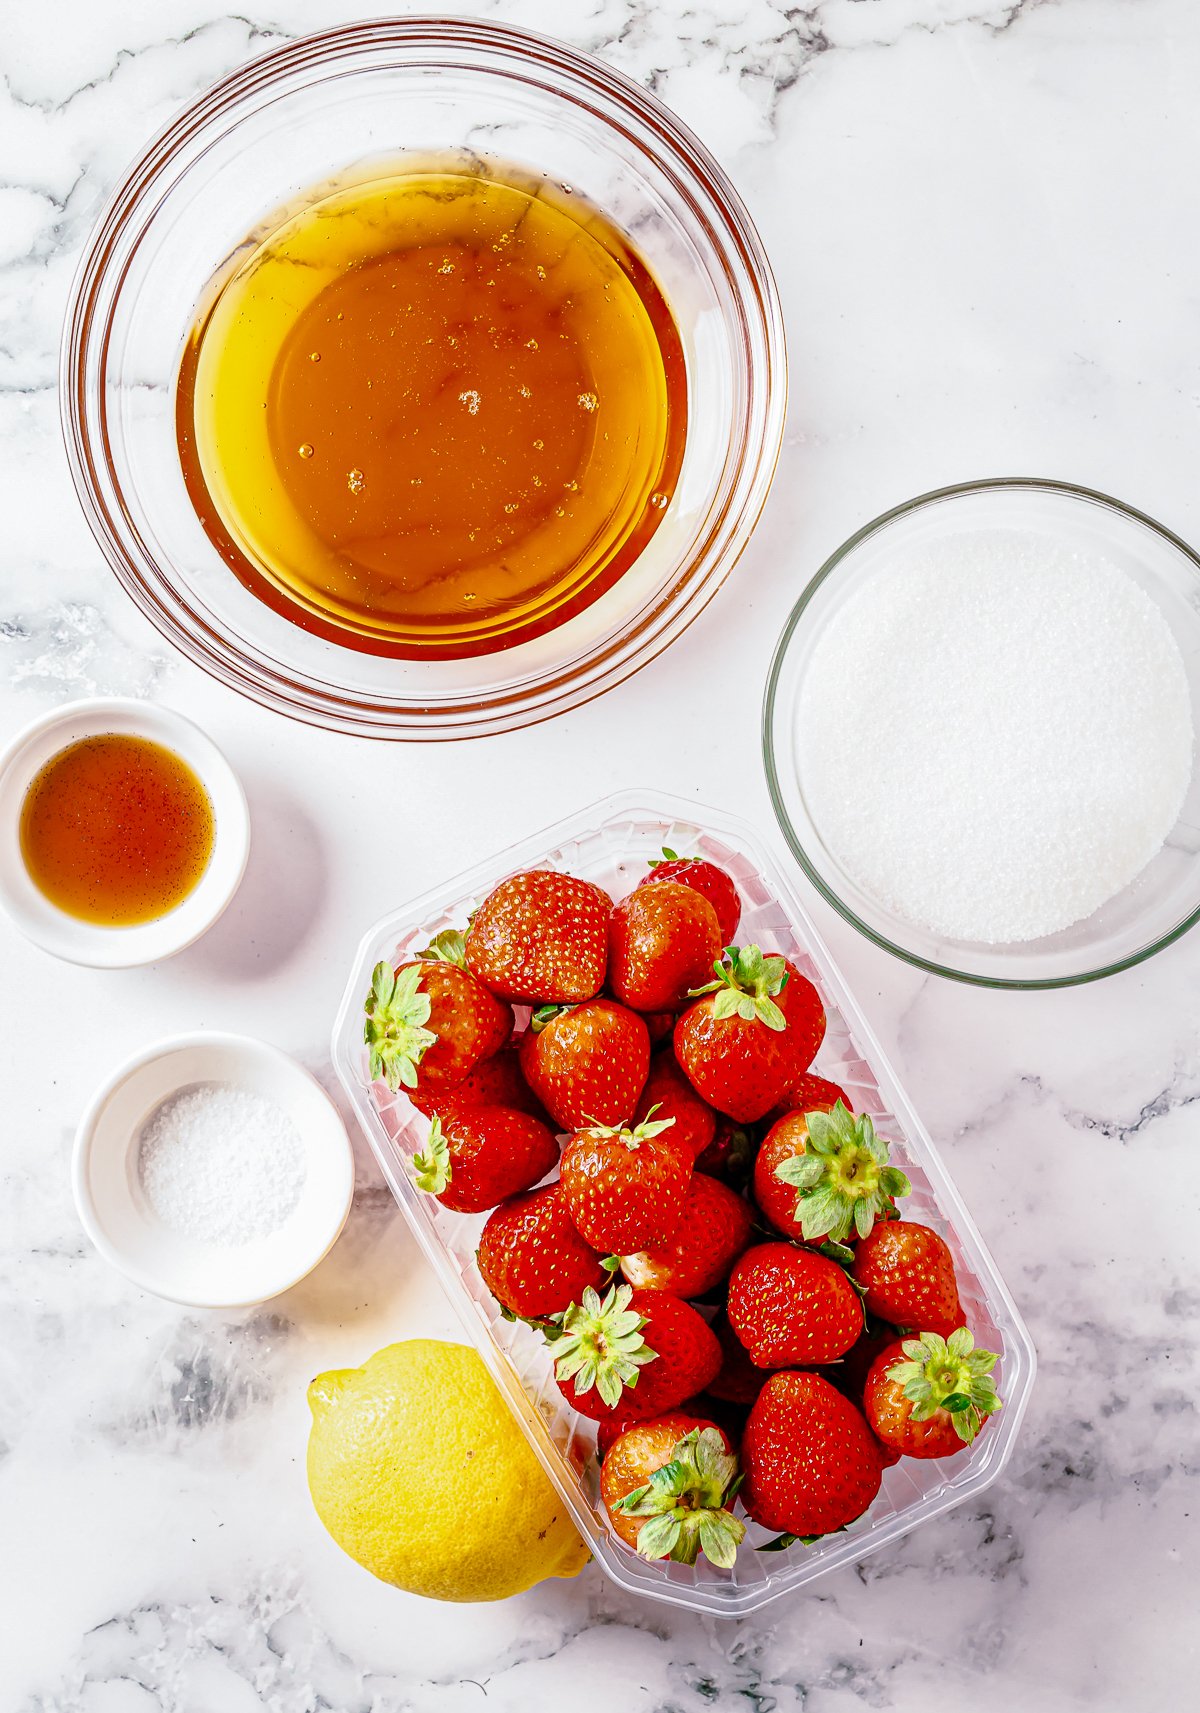 Ingredients needed to make Strawberry Butter.